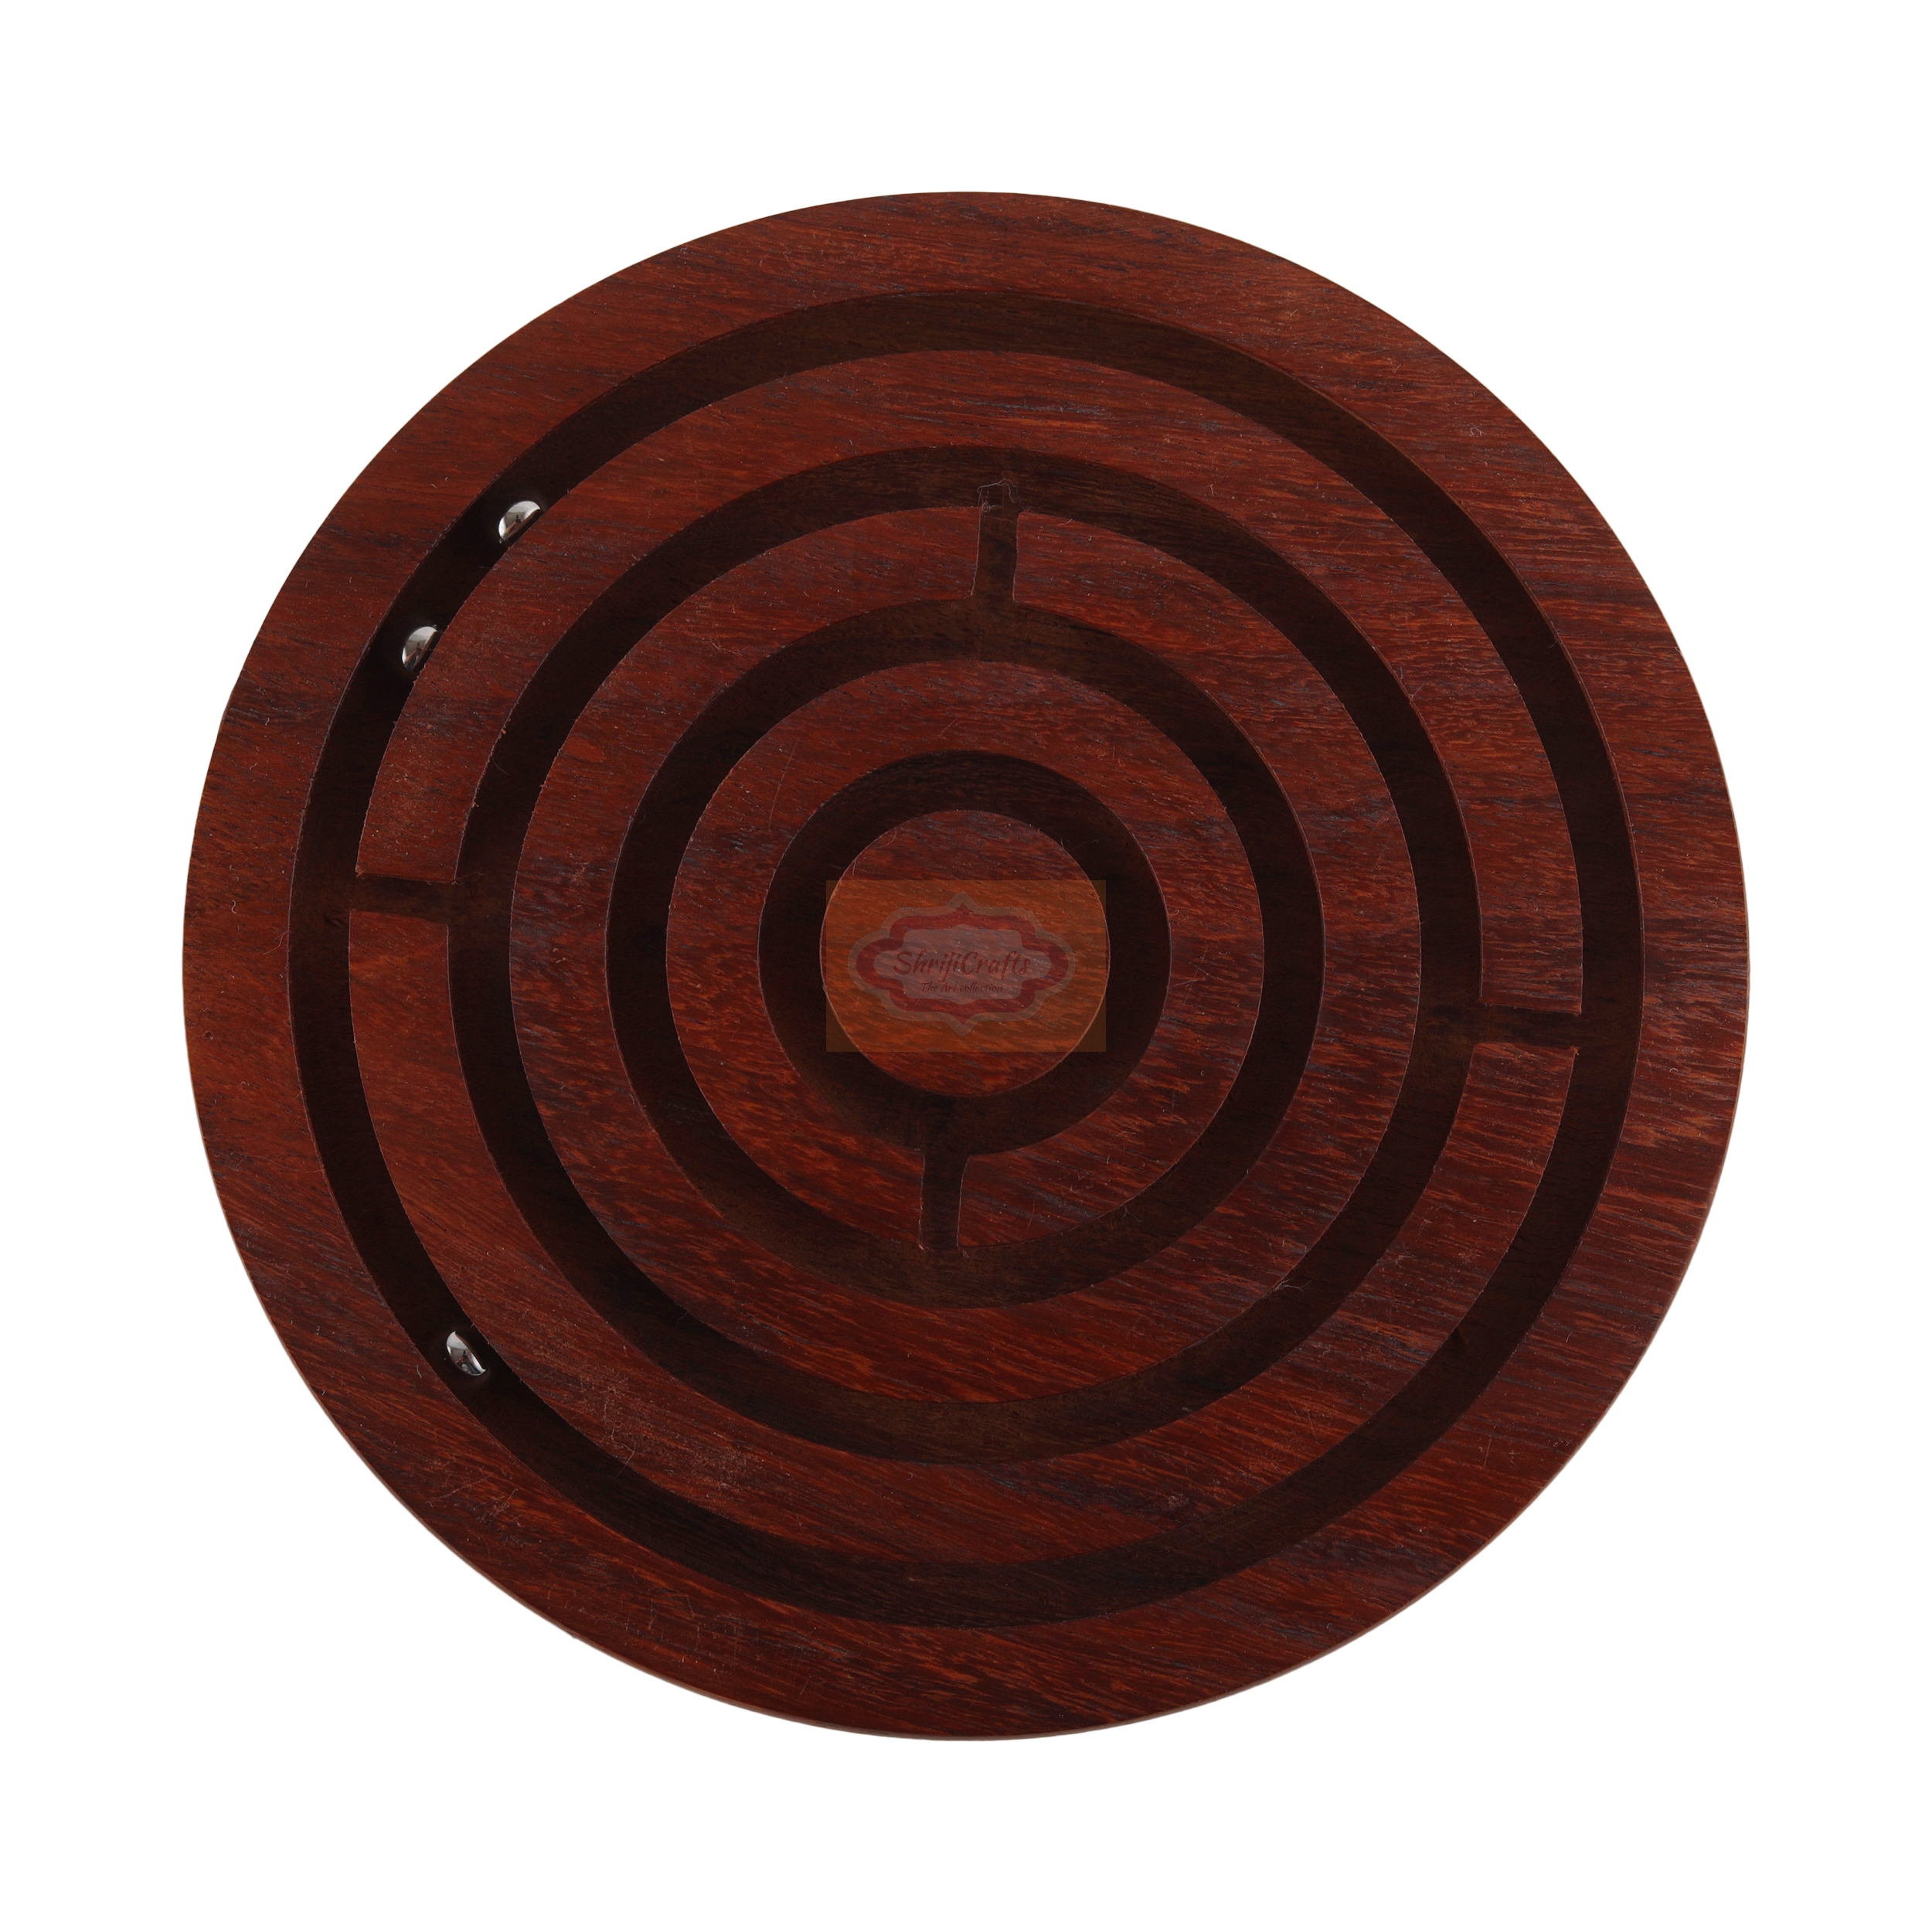 Shrijicrafts | ShrijiCrafts Wooden Labyrinth Ball-in-a-Maze Puzzle Game (Dia - 4 Inches) 7